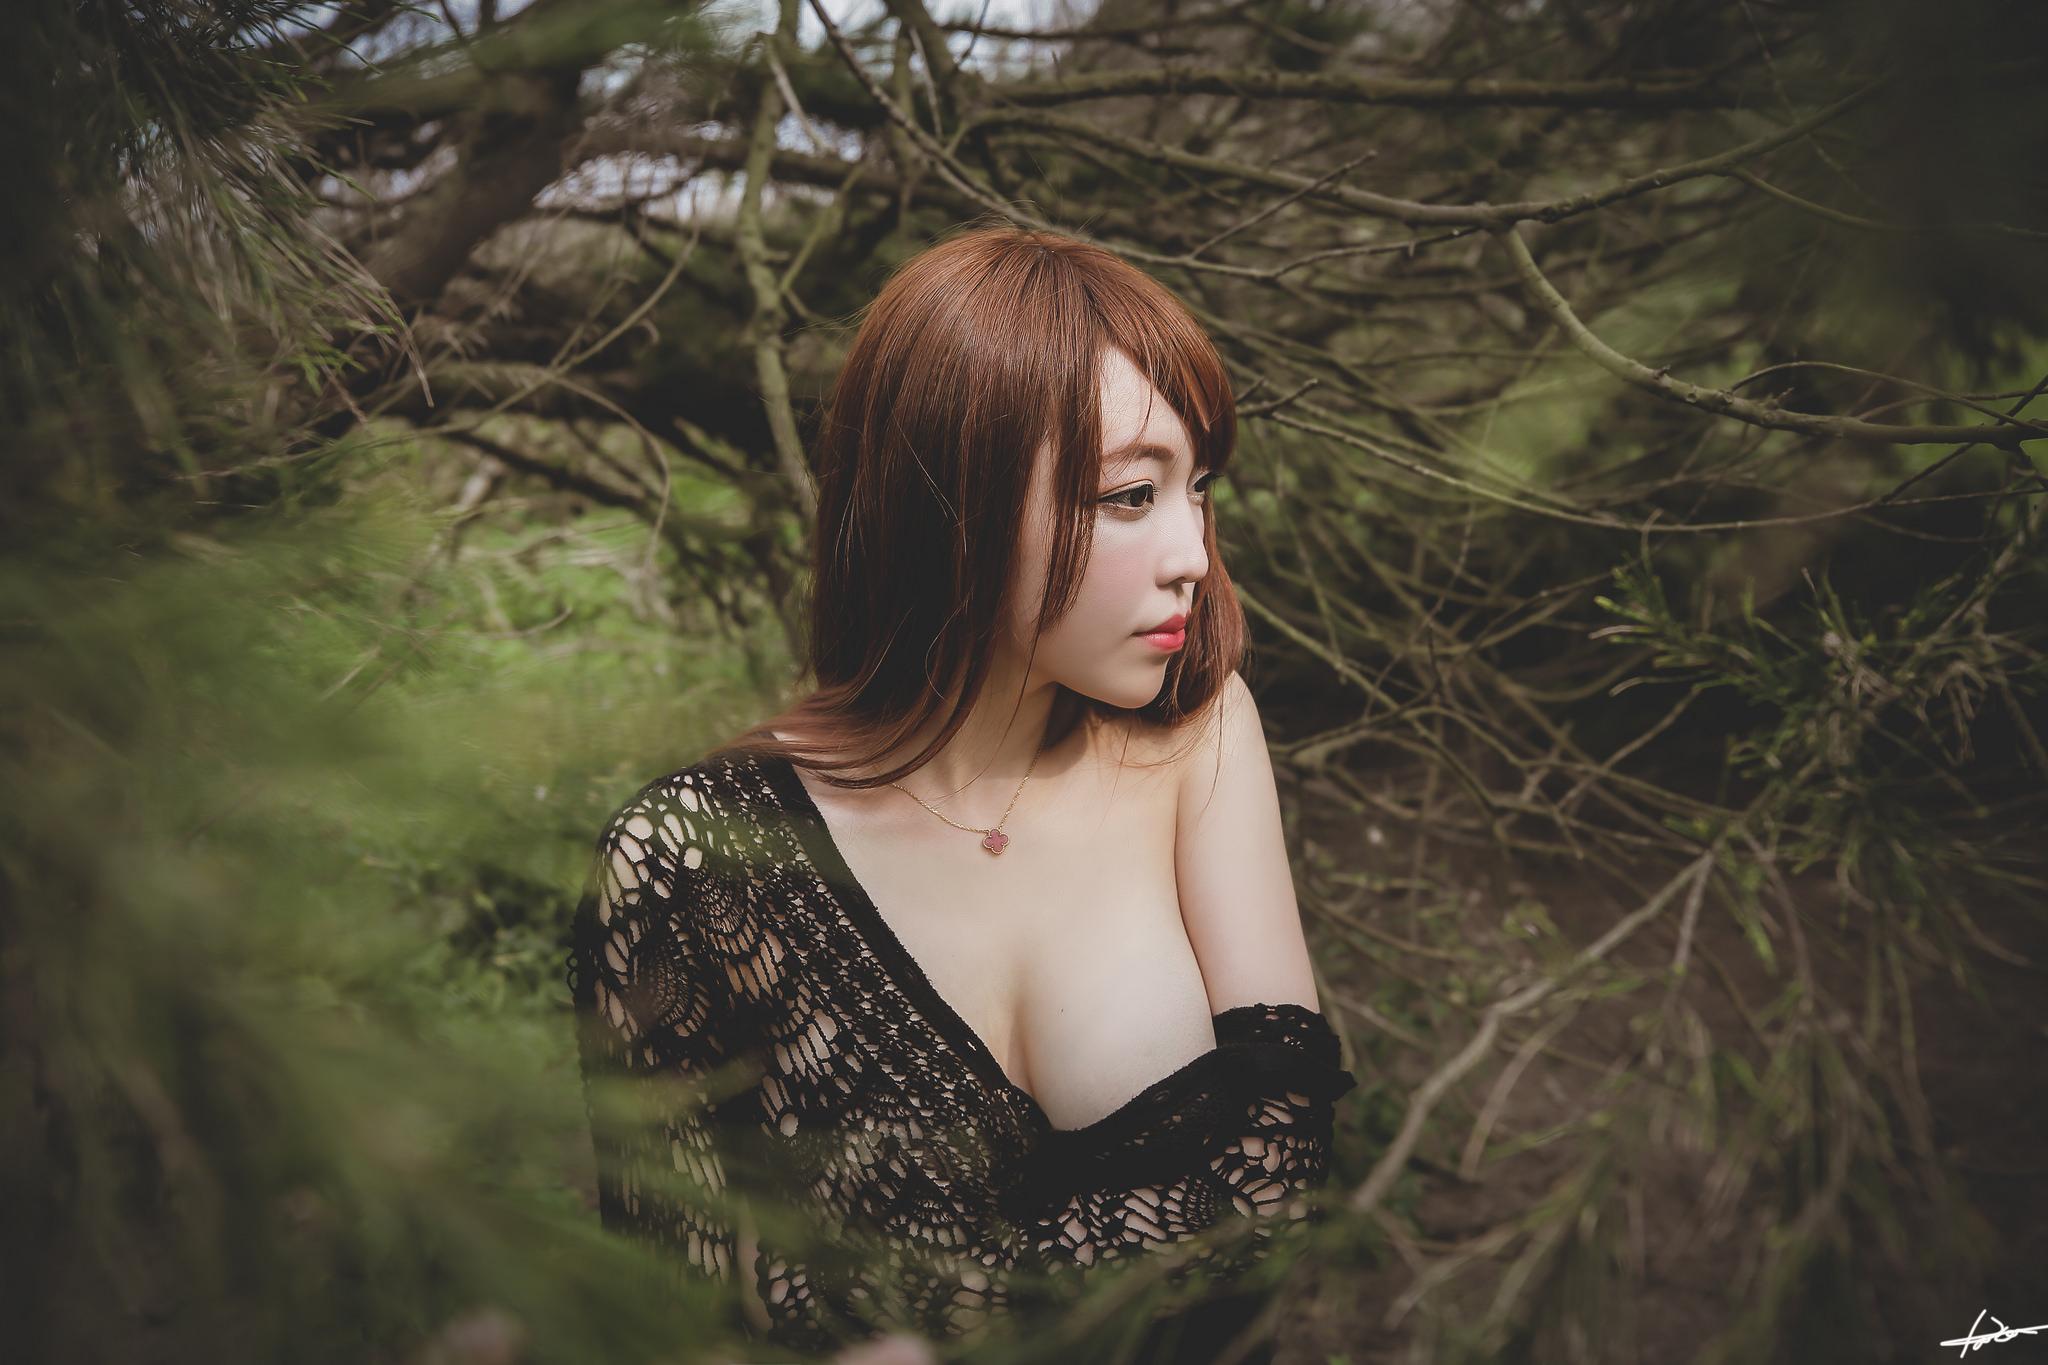 People 2048x1365 Asian women brunette model looking into the distance branch see-through clothing no bra covering boobs women outdoors necklace cleavage